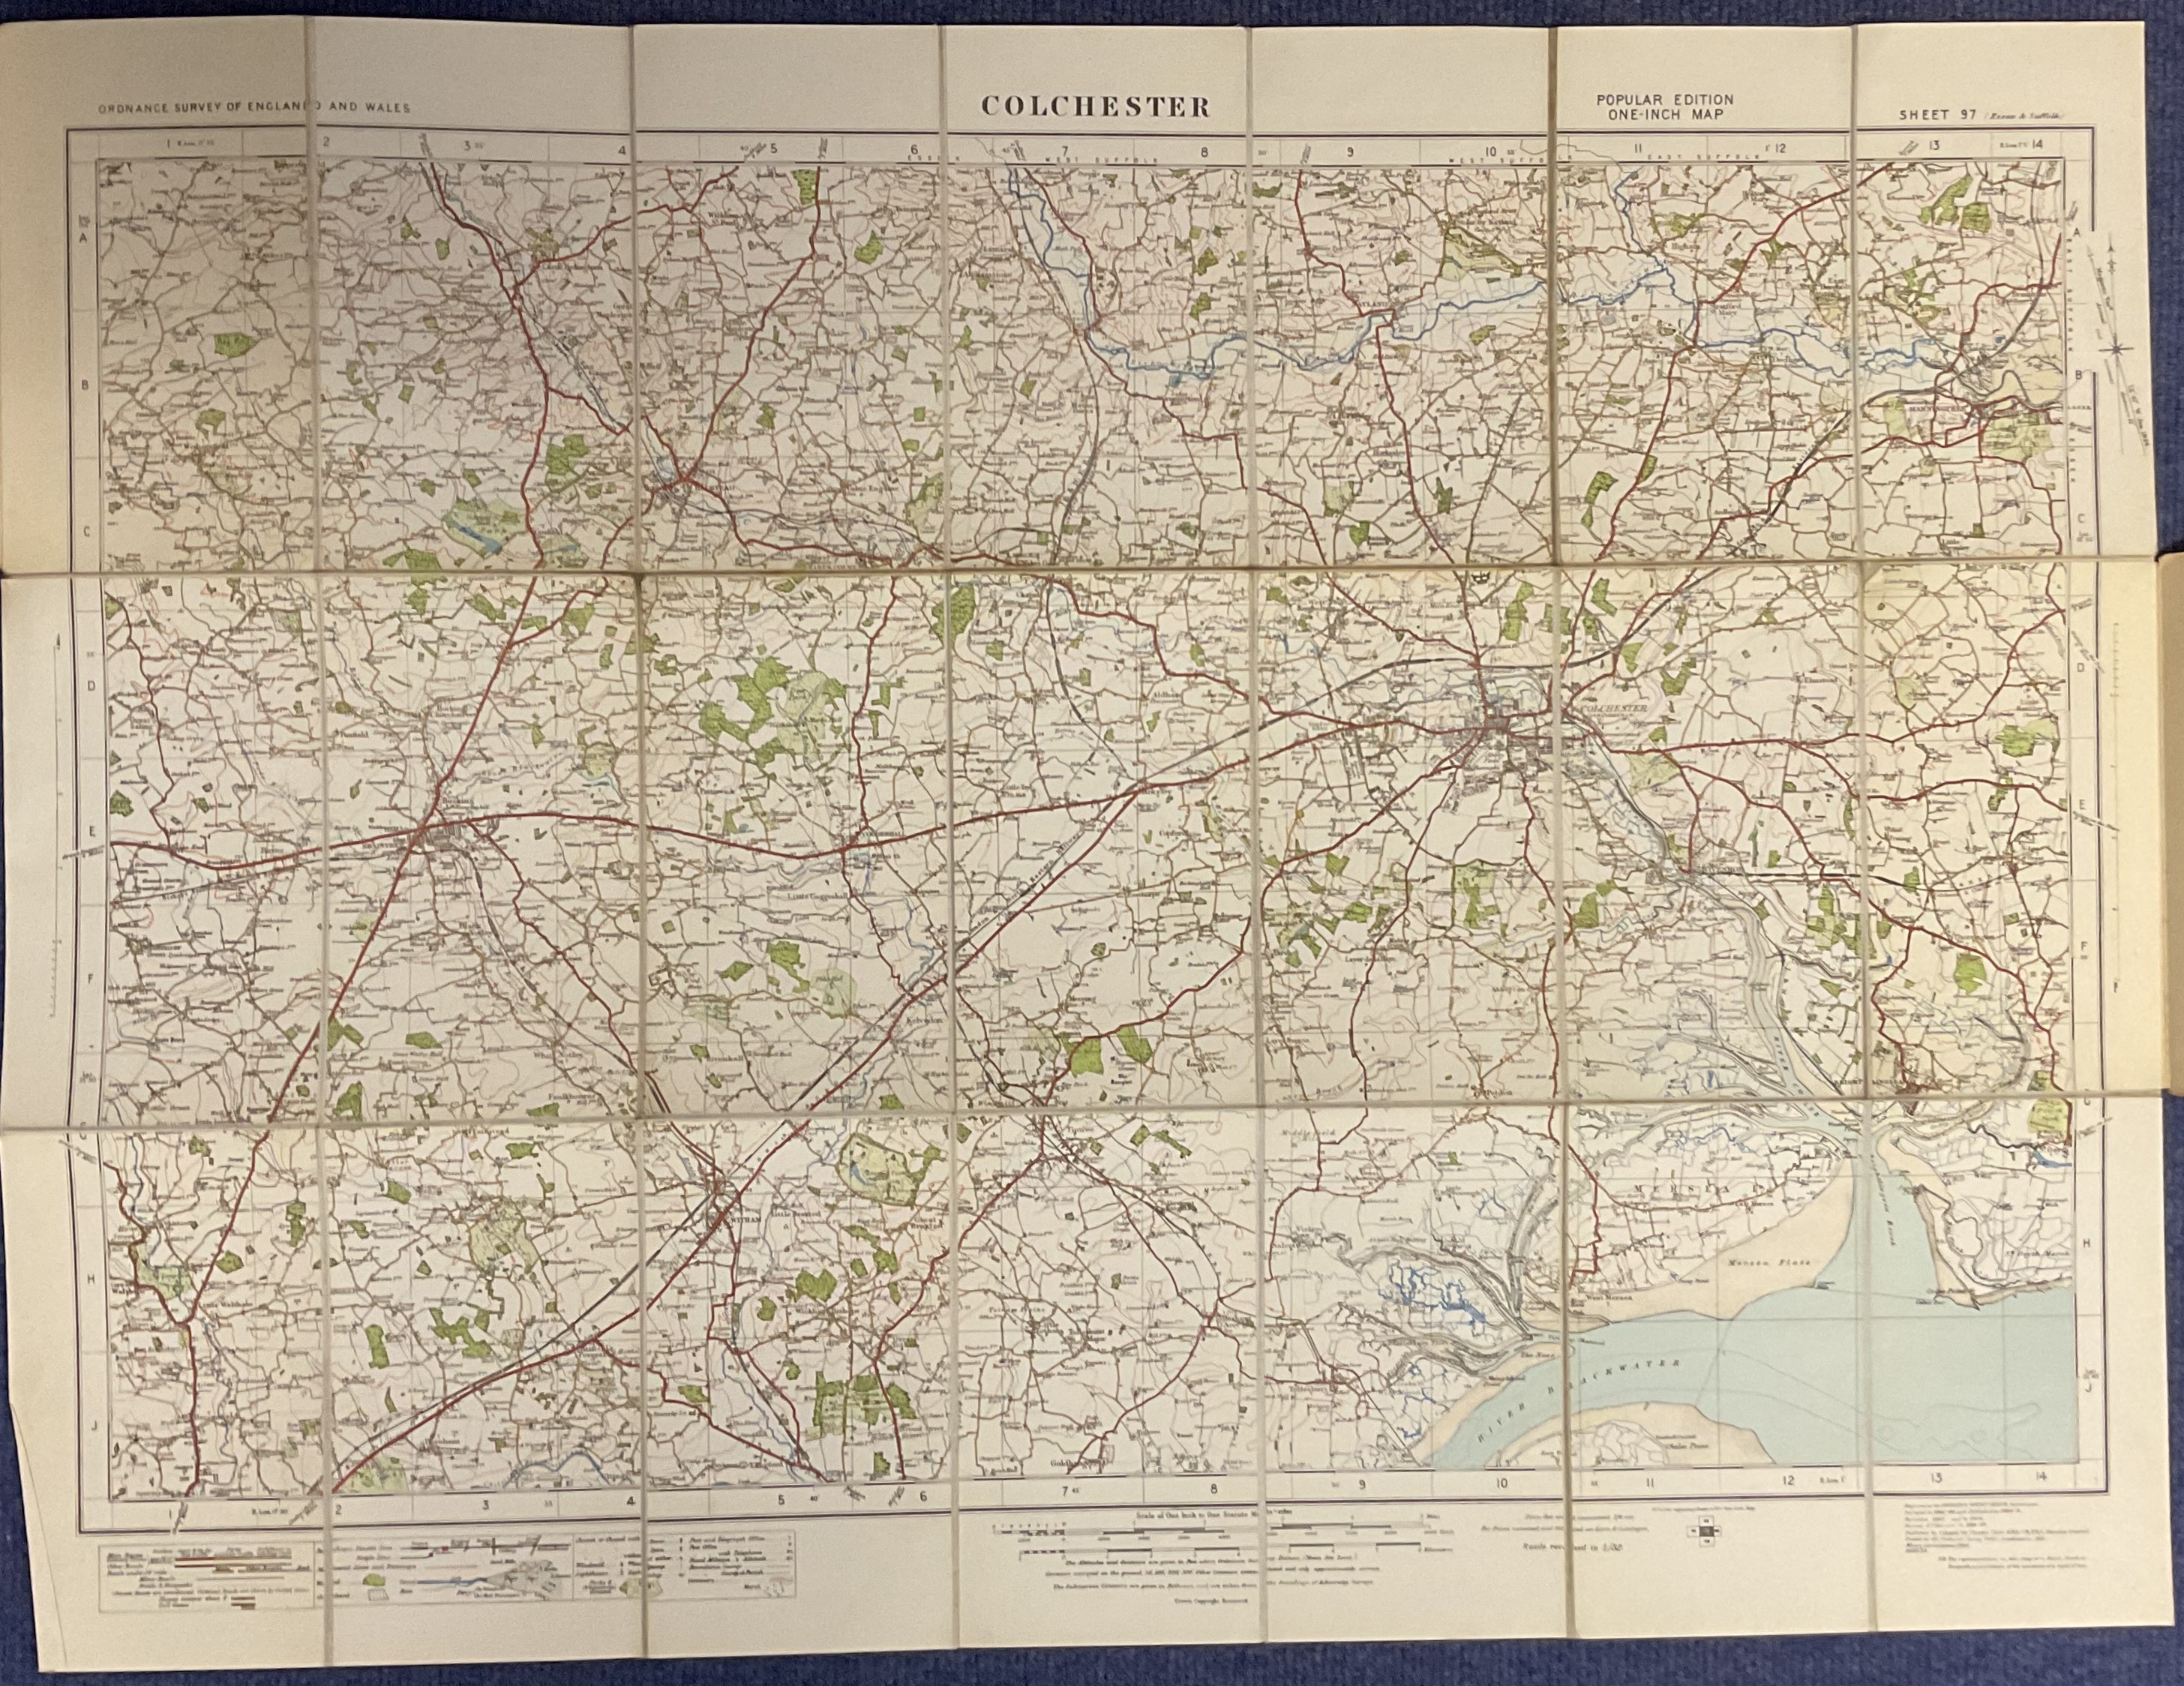 Ordnance Survey contoured road map of Colchester. Coloured popular edition. Large folded map - Image 2 of 2